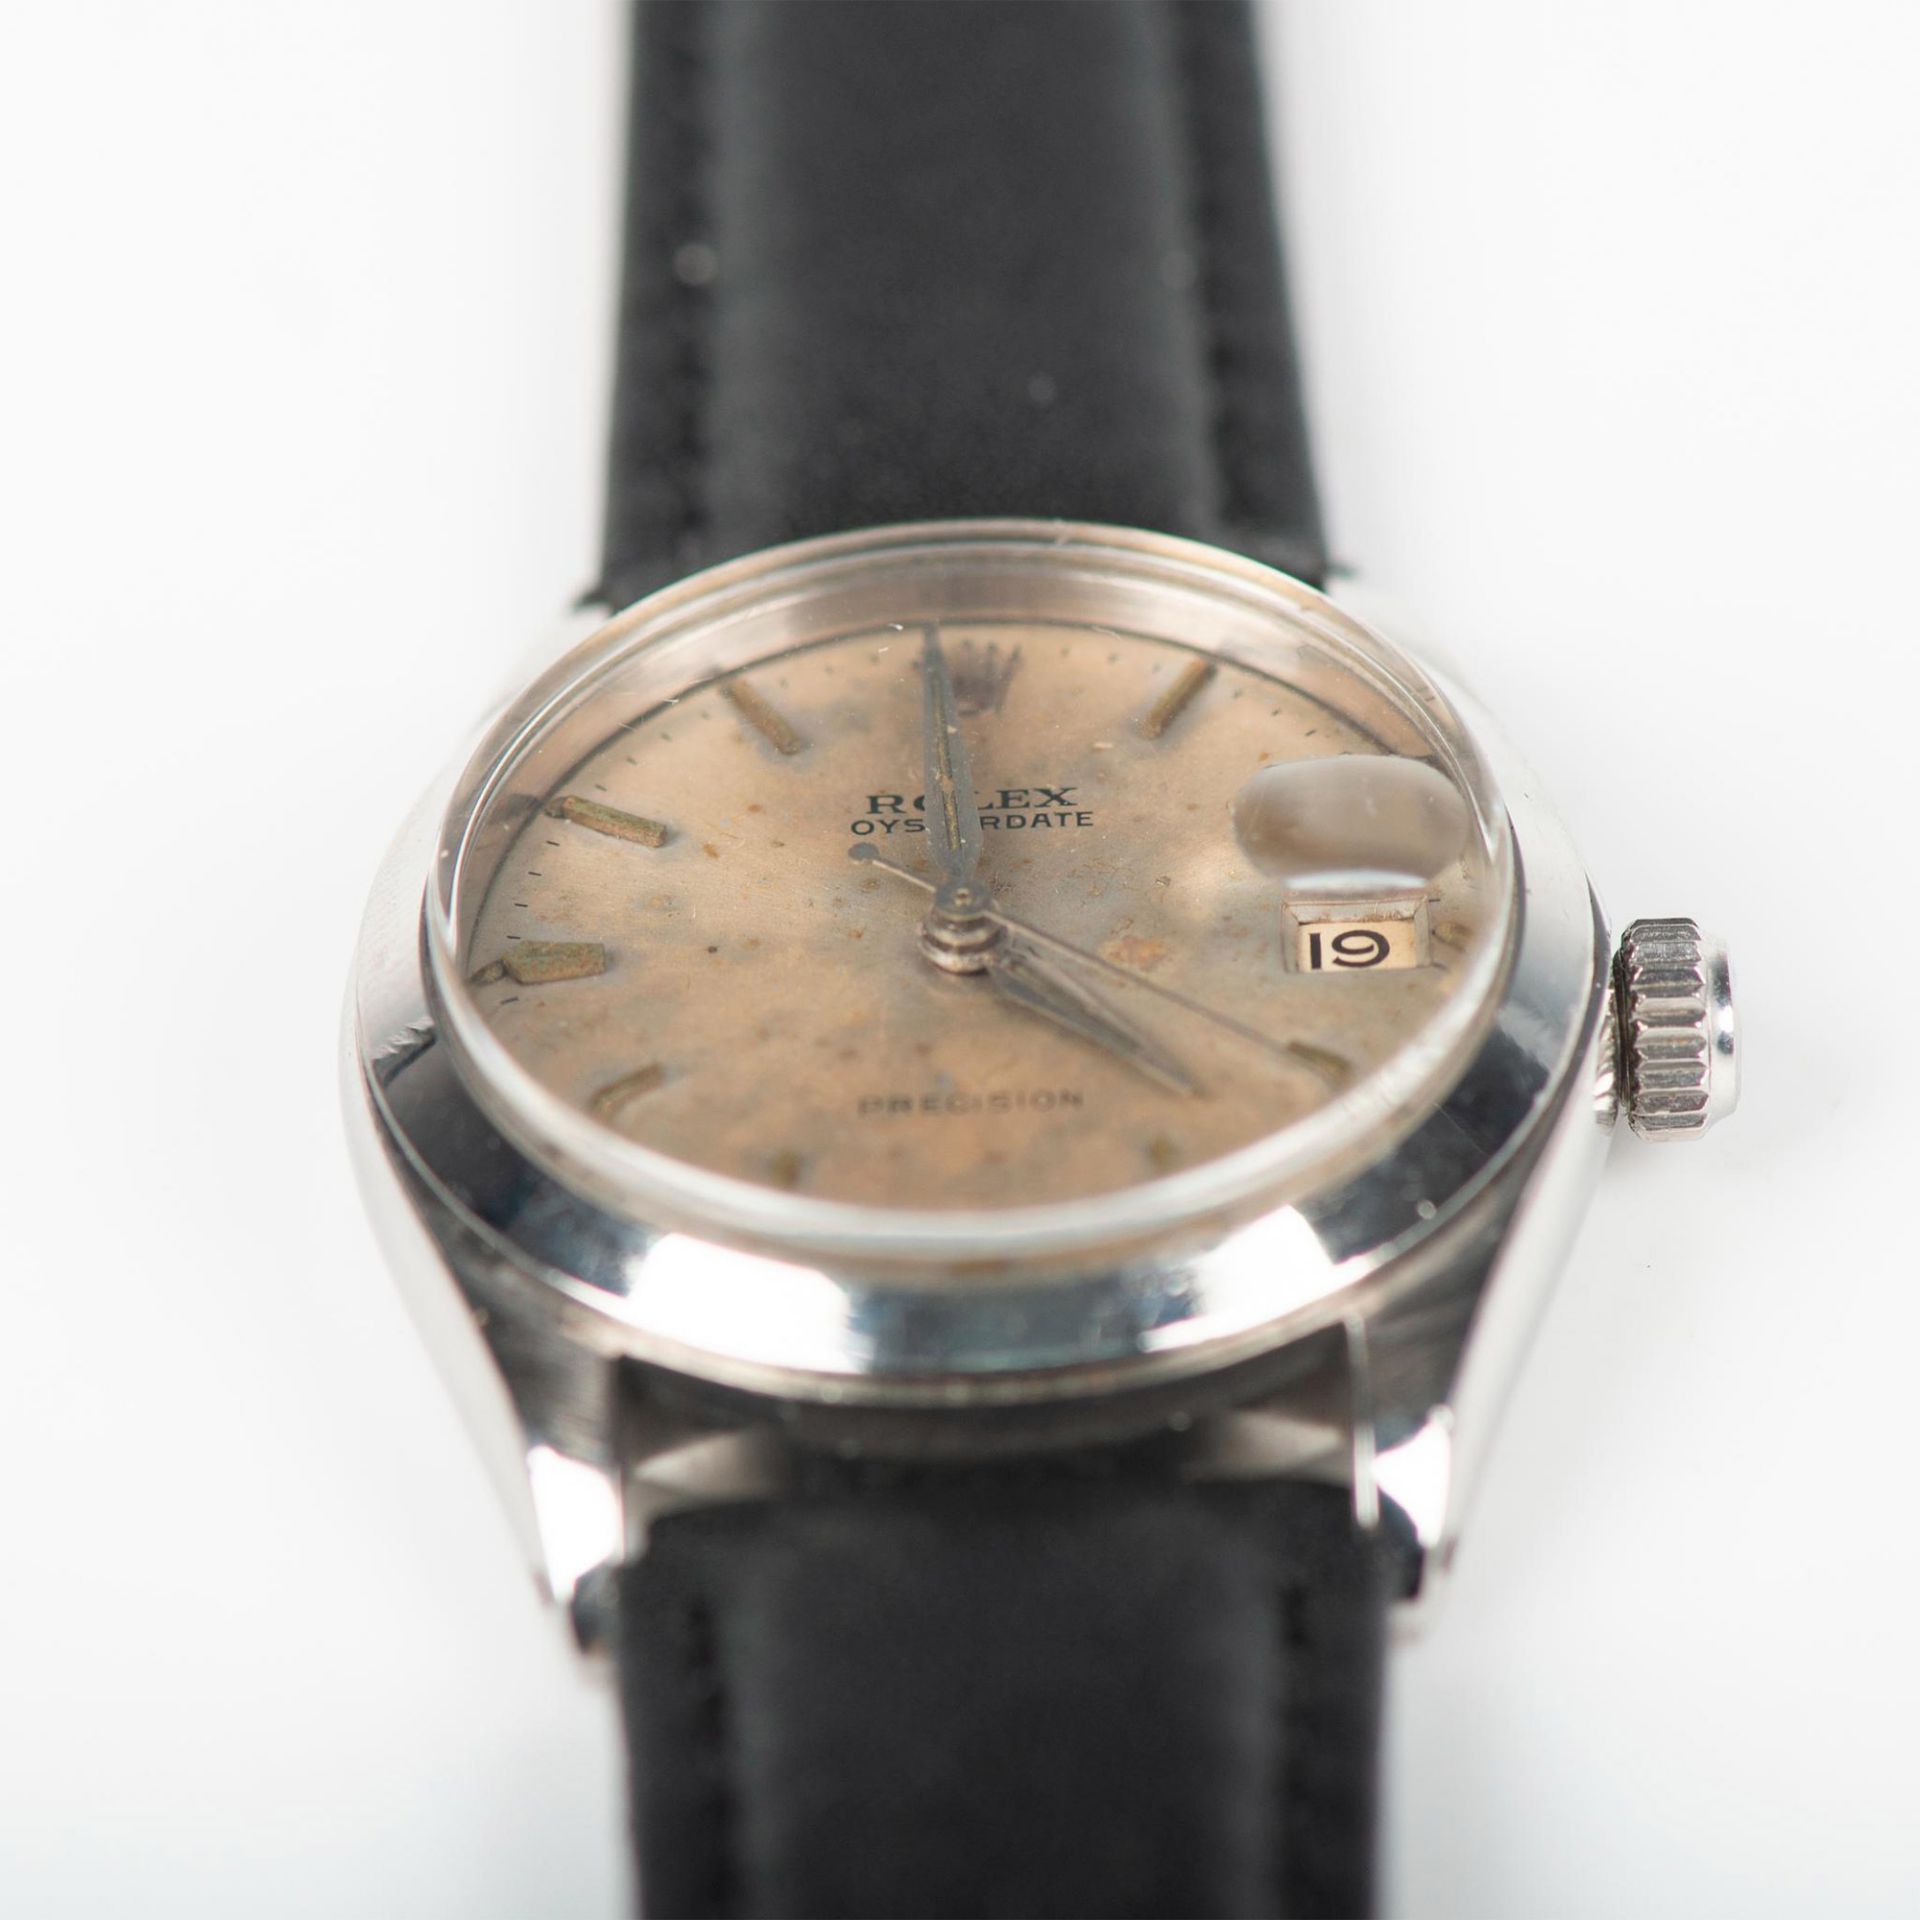 Vintage 1952 Rolex Oysterdate Precision Wind-Up Watch, 6466 - Image 6 of 18